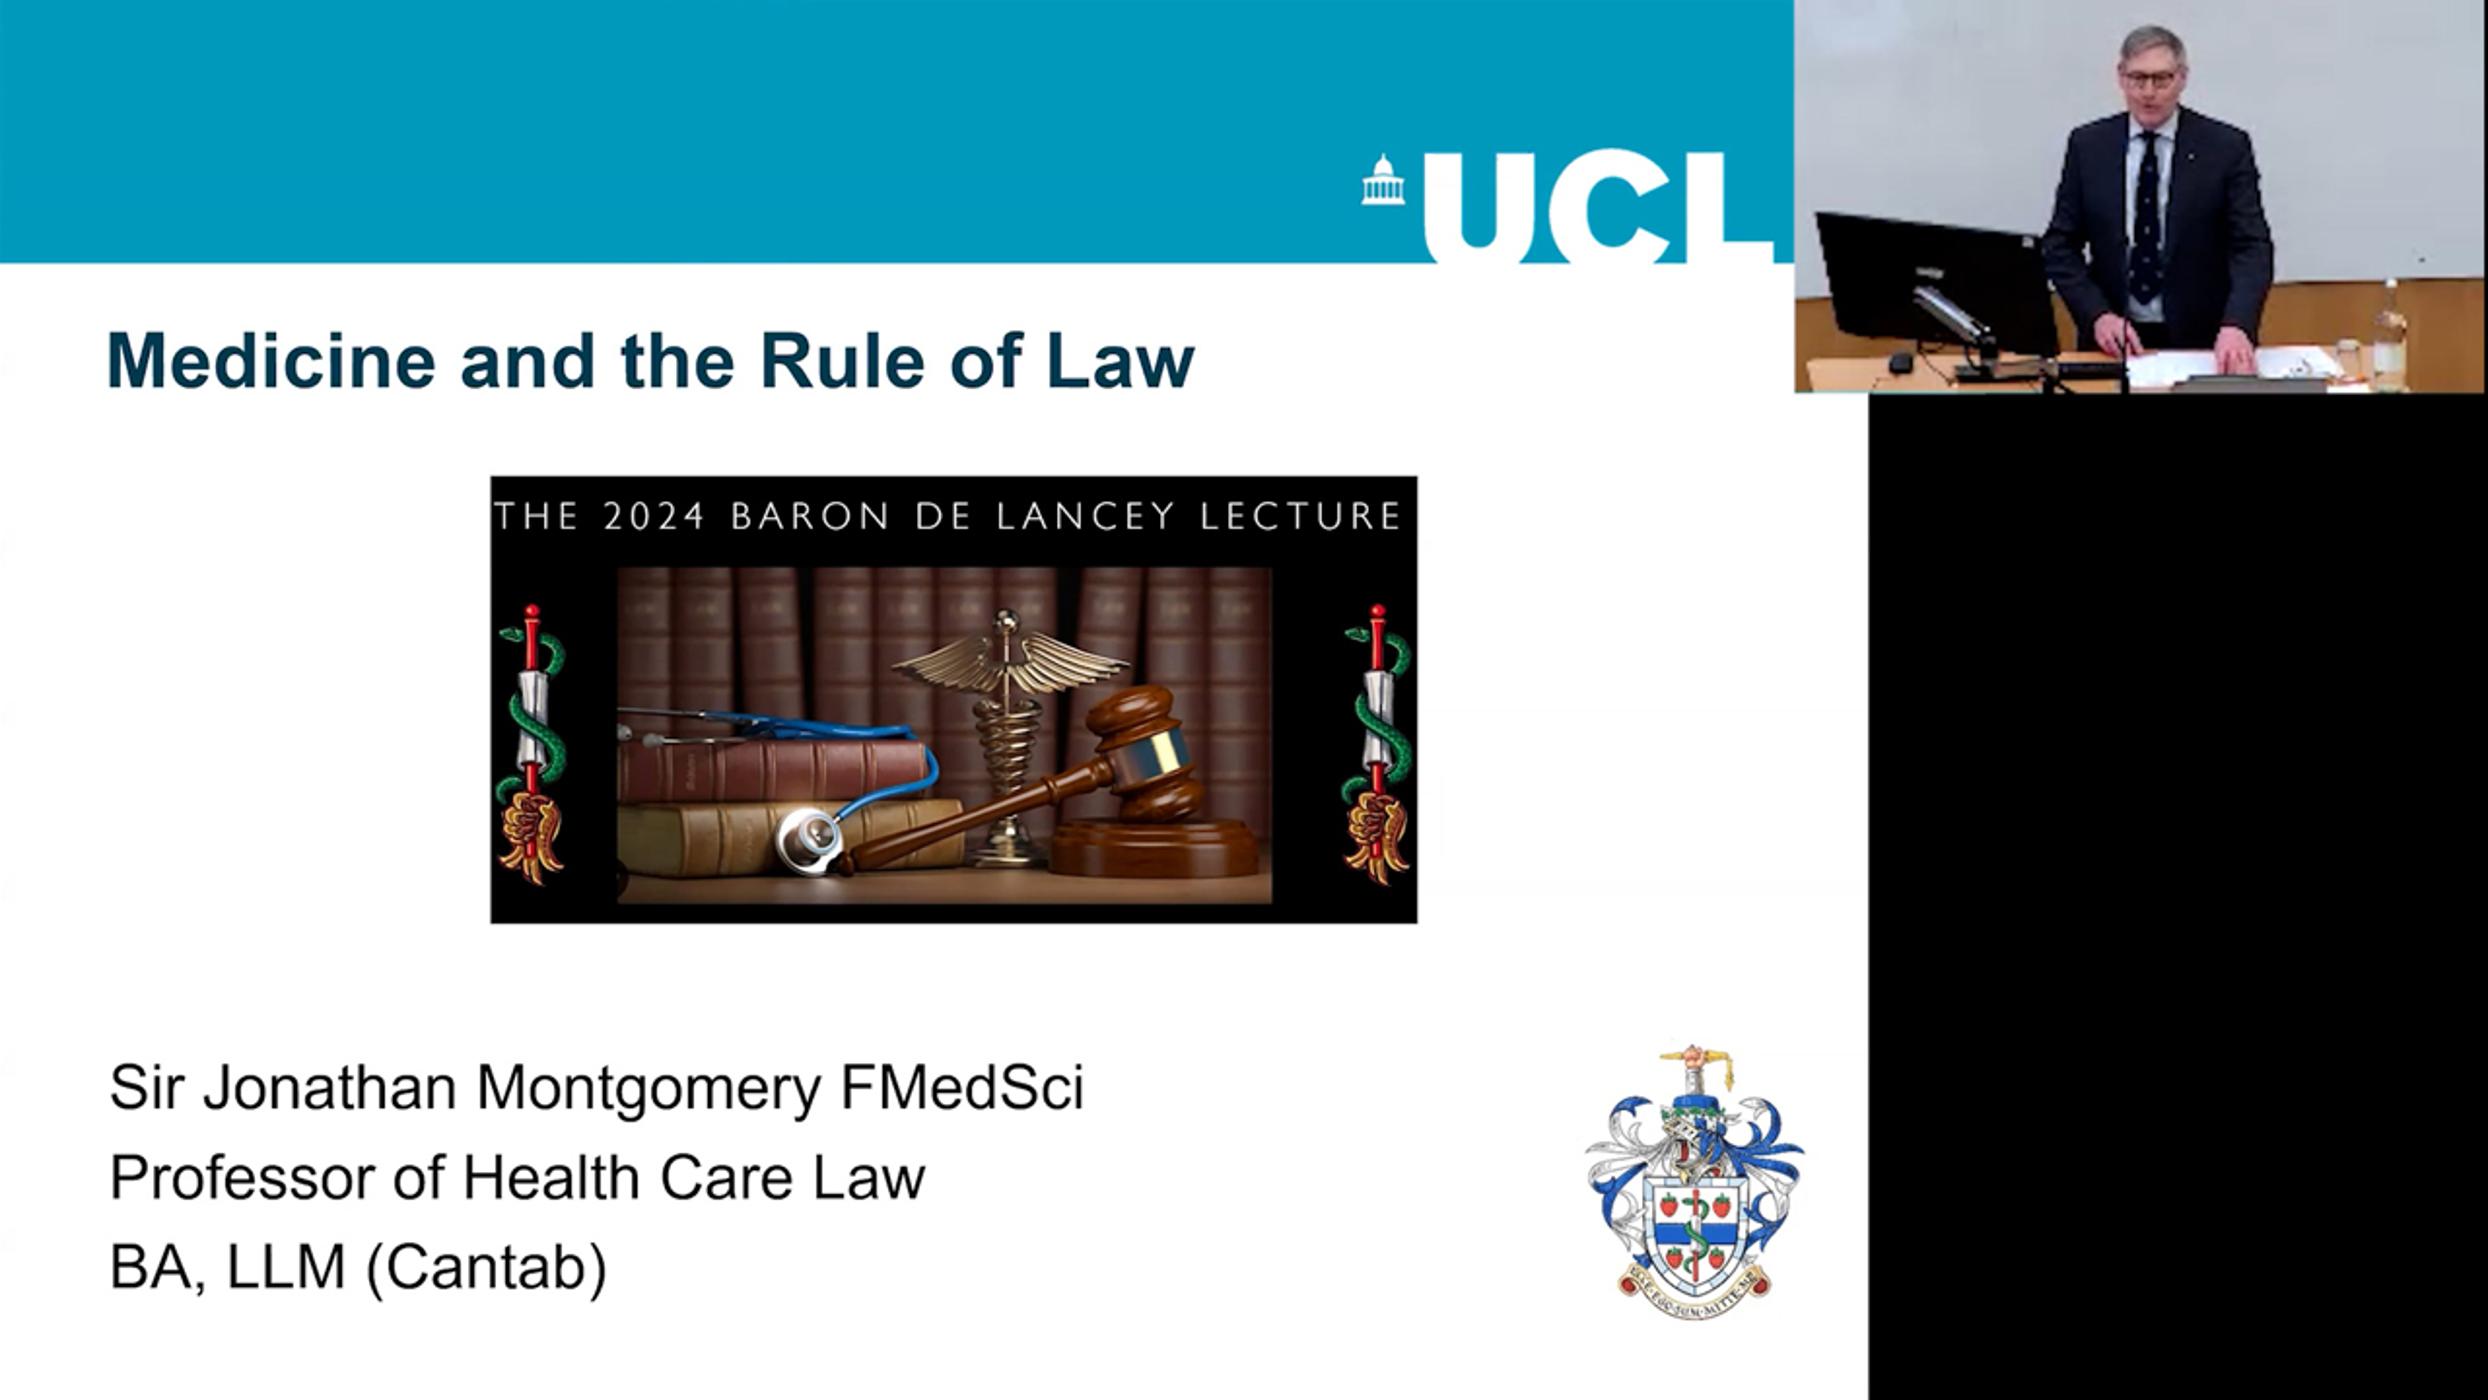 ’Medicine and the Rule of Law’: The Baron Ver Heyden de Lancey Lecture 2024